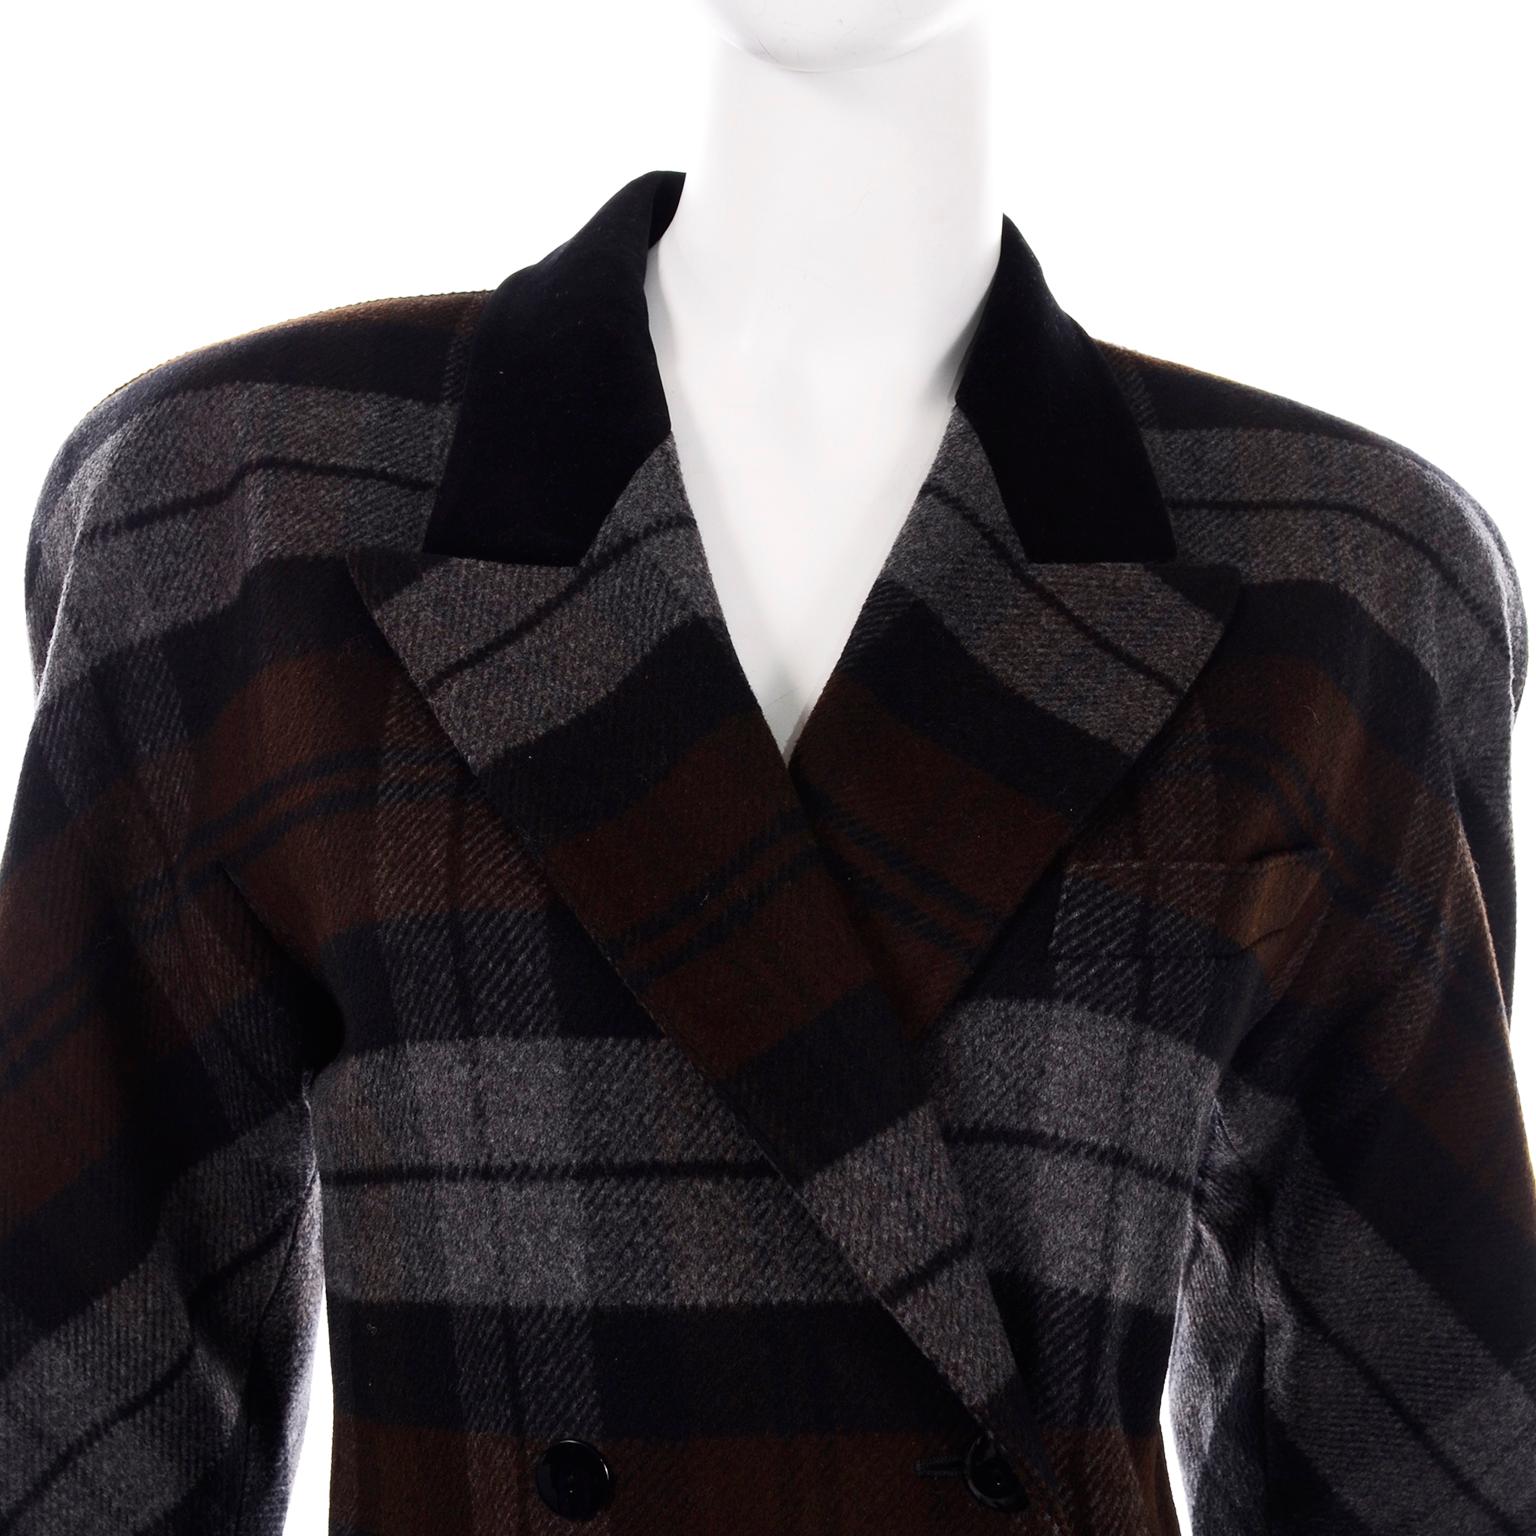 Escada Margaretha Ley Plaid Wool Blazer Longline Jacket in Gray & Brown Plaid In Excellent Condition For Sale In Portland, OR